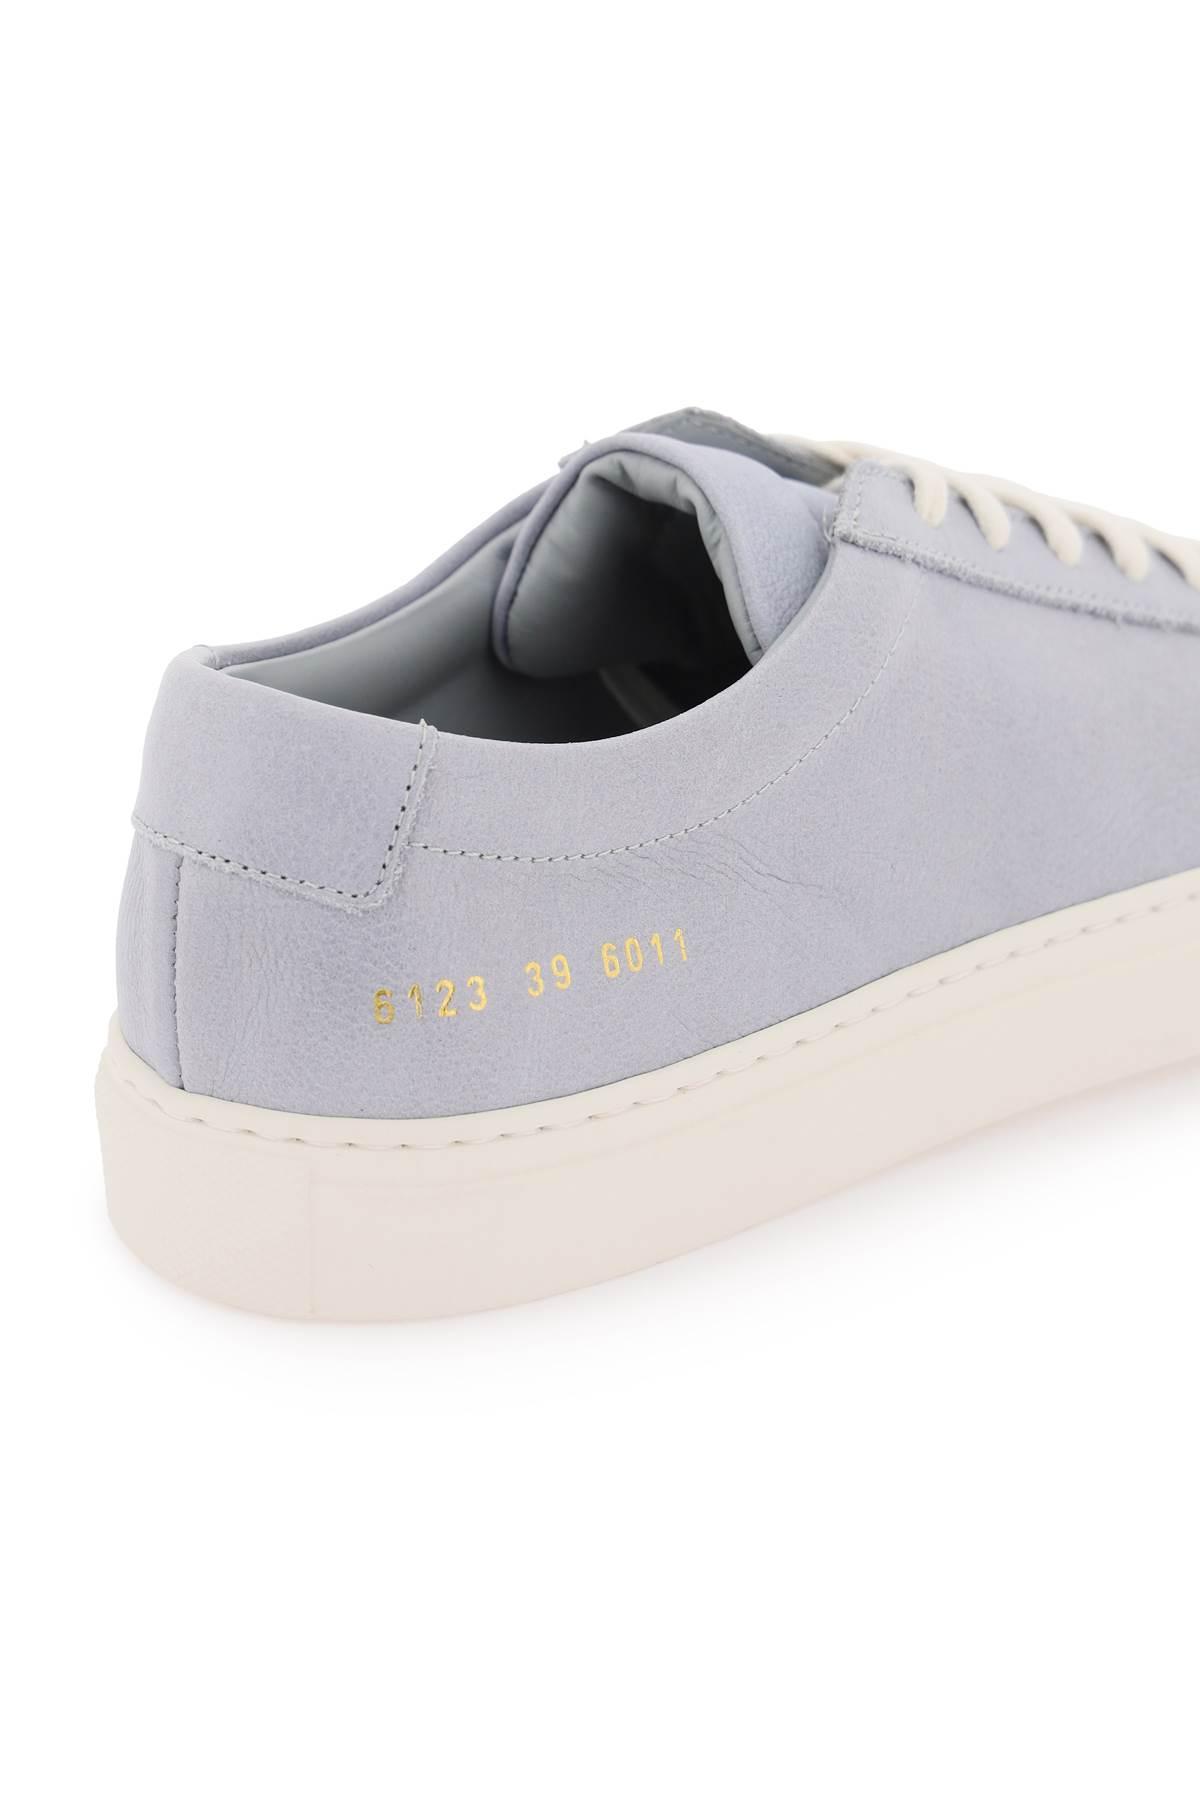 Common Projects Original Achilles Leather Sneakers in White | Lyst